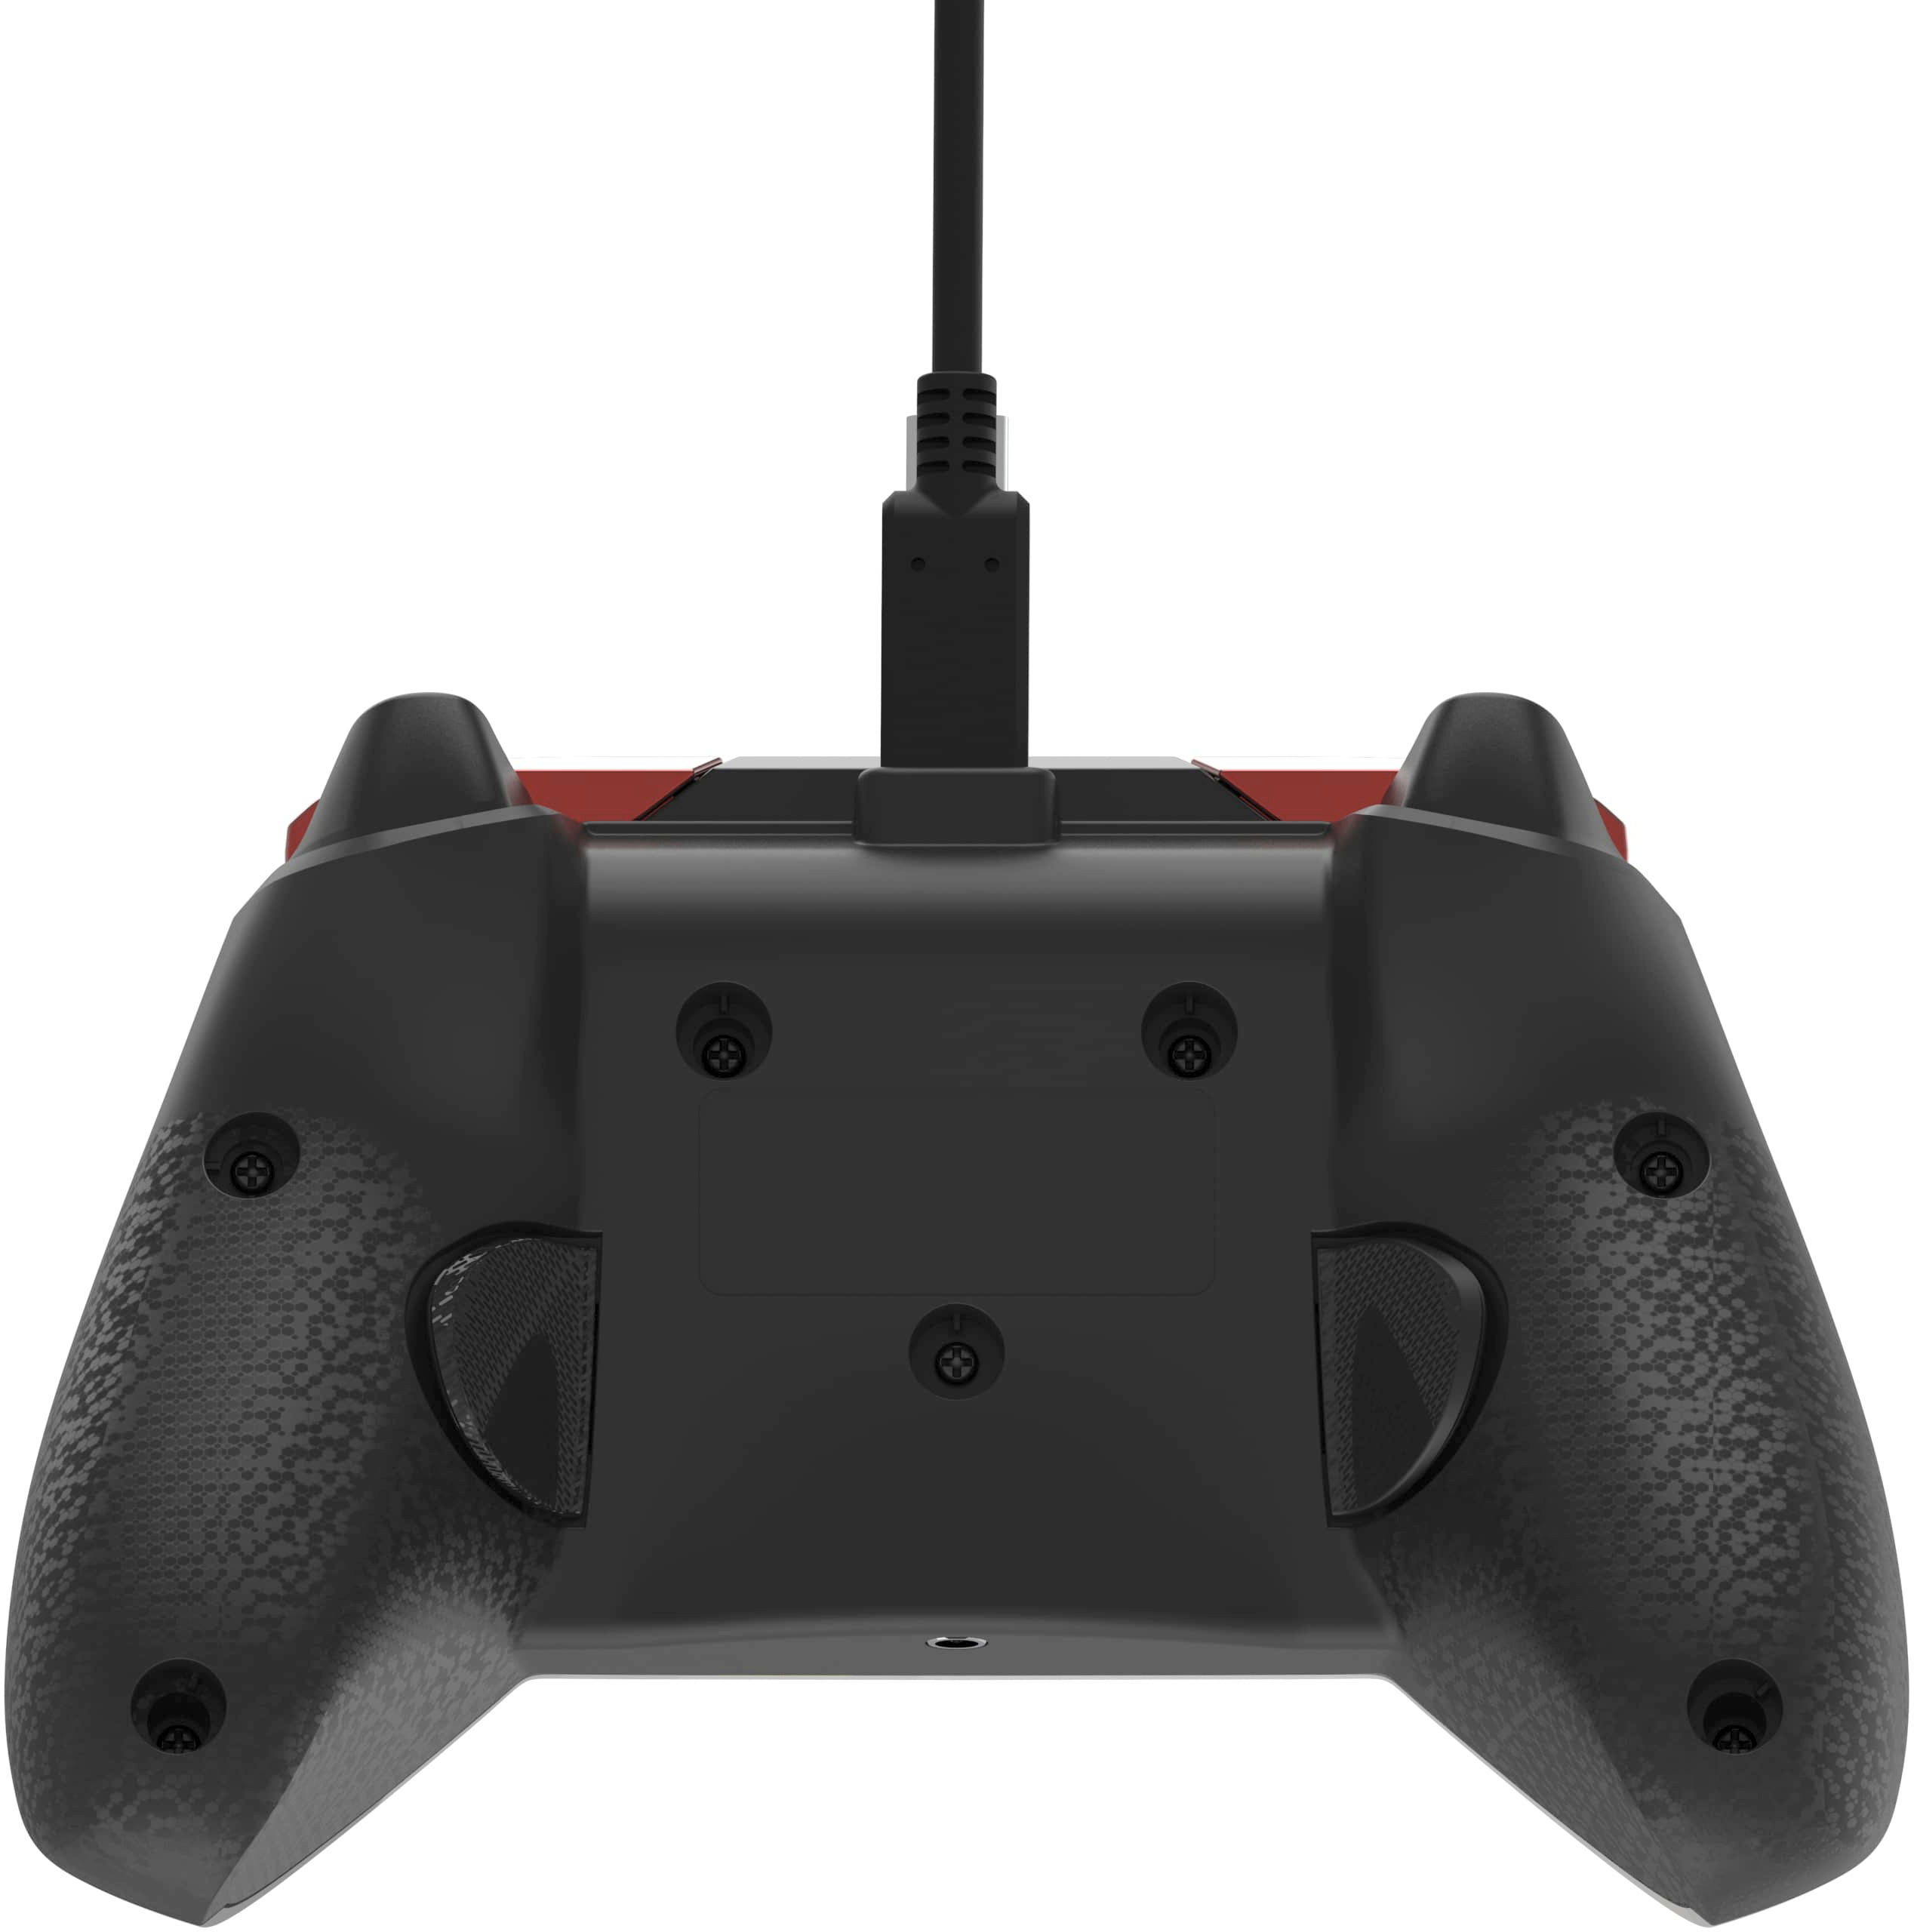 Grifta gamepad splits in two and changes size